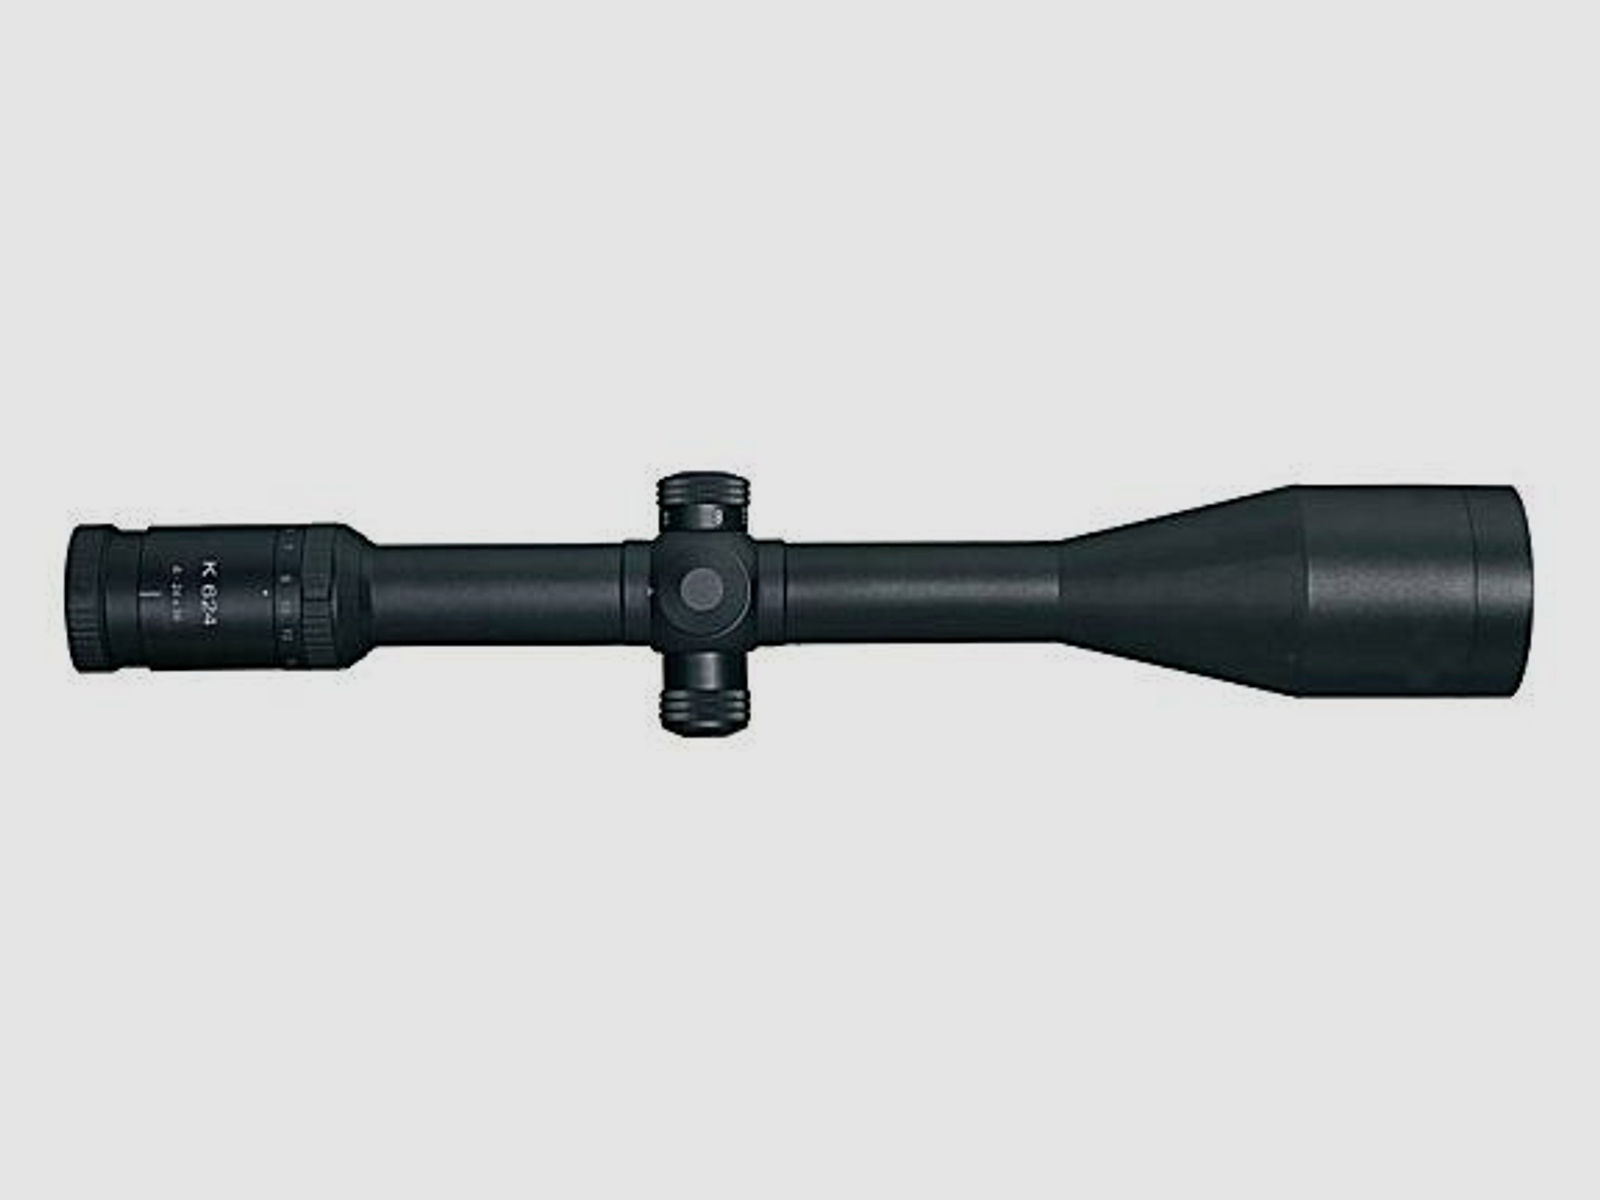 KAHLES ZF m. Leuchtabsehen (1. BE) 6-24x56 K624i ccw links Abs. SKMR4     (34mm)